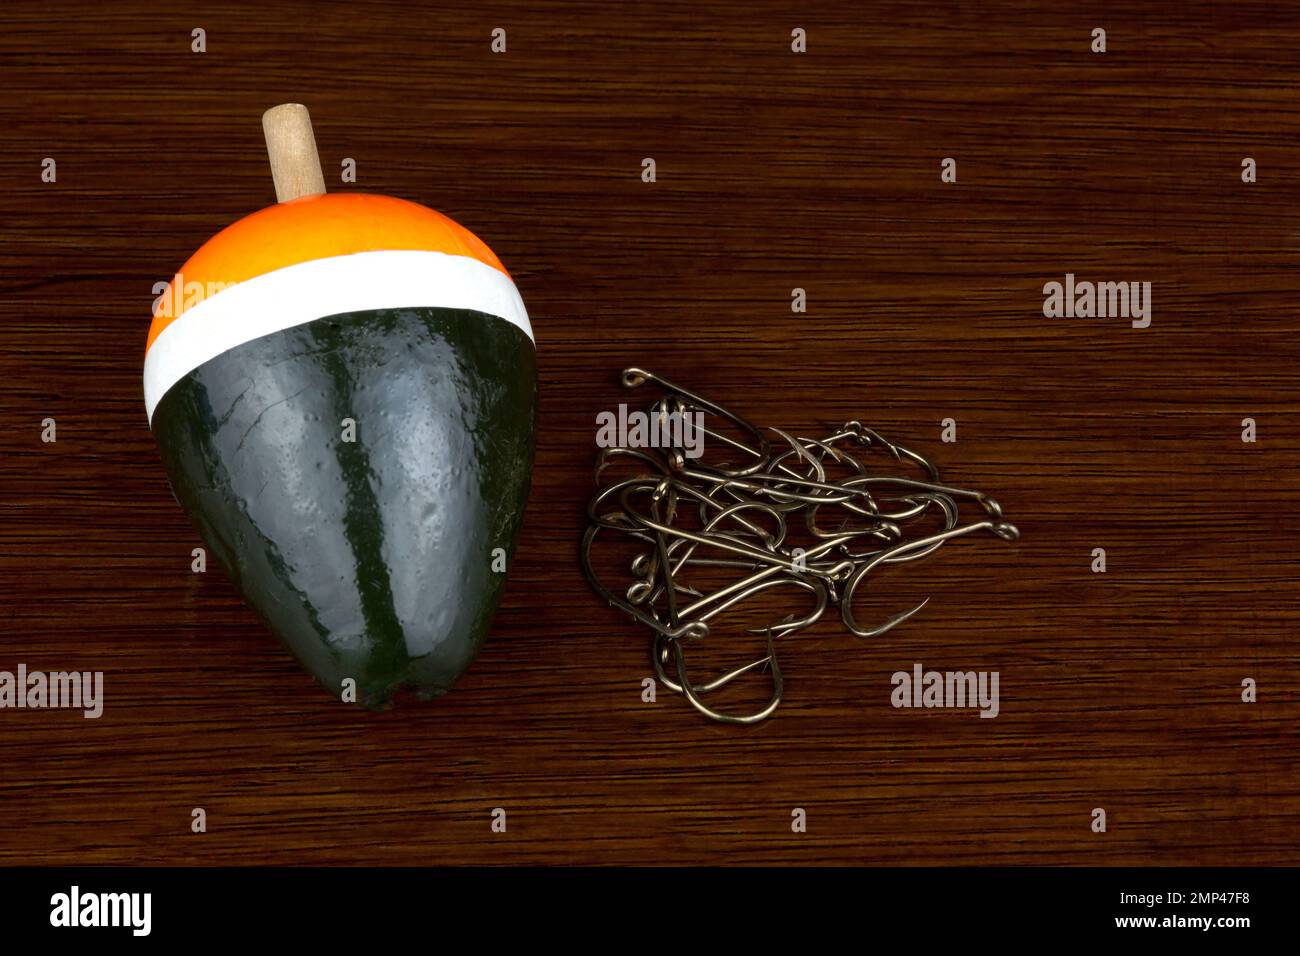 Fishing hooks and old angling float on a polished wooden surface Stock Photo